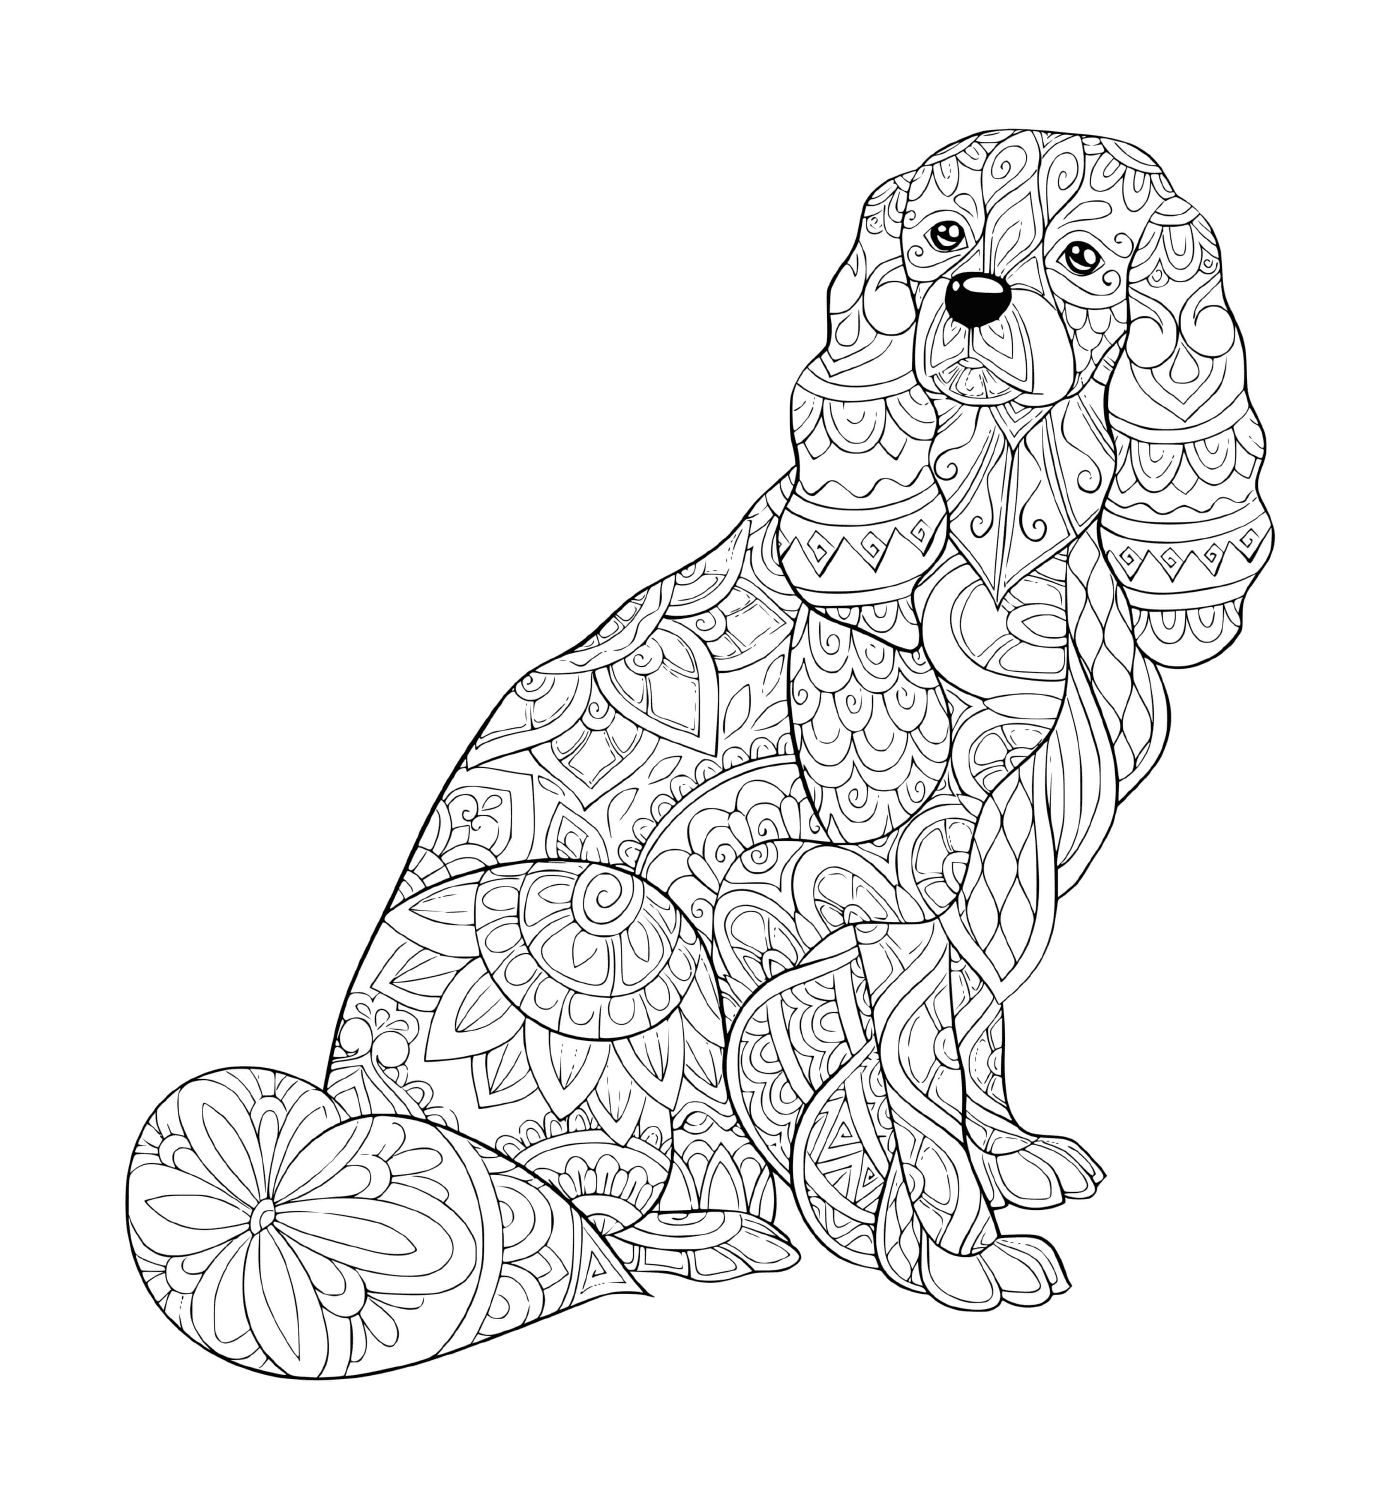  Teckel dog zentangle sausage for adult stress relief 